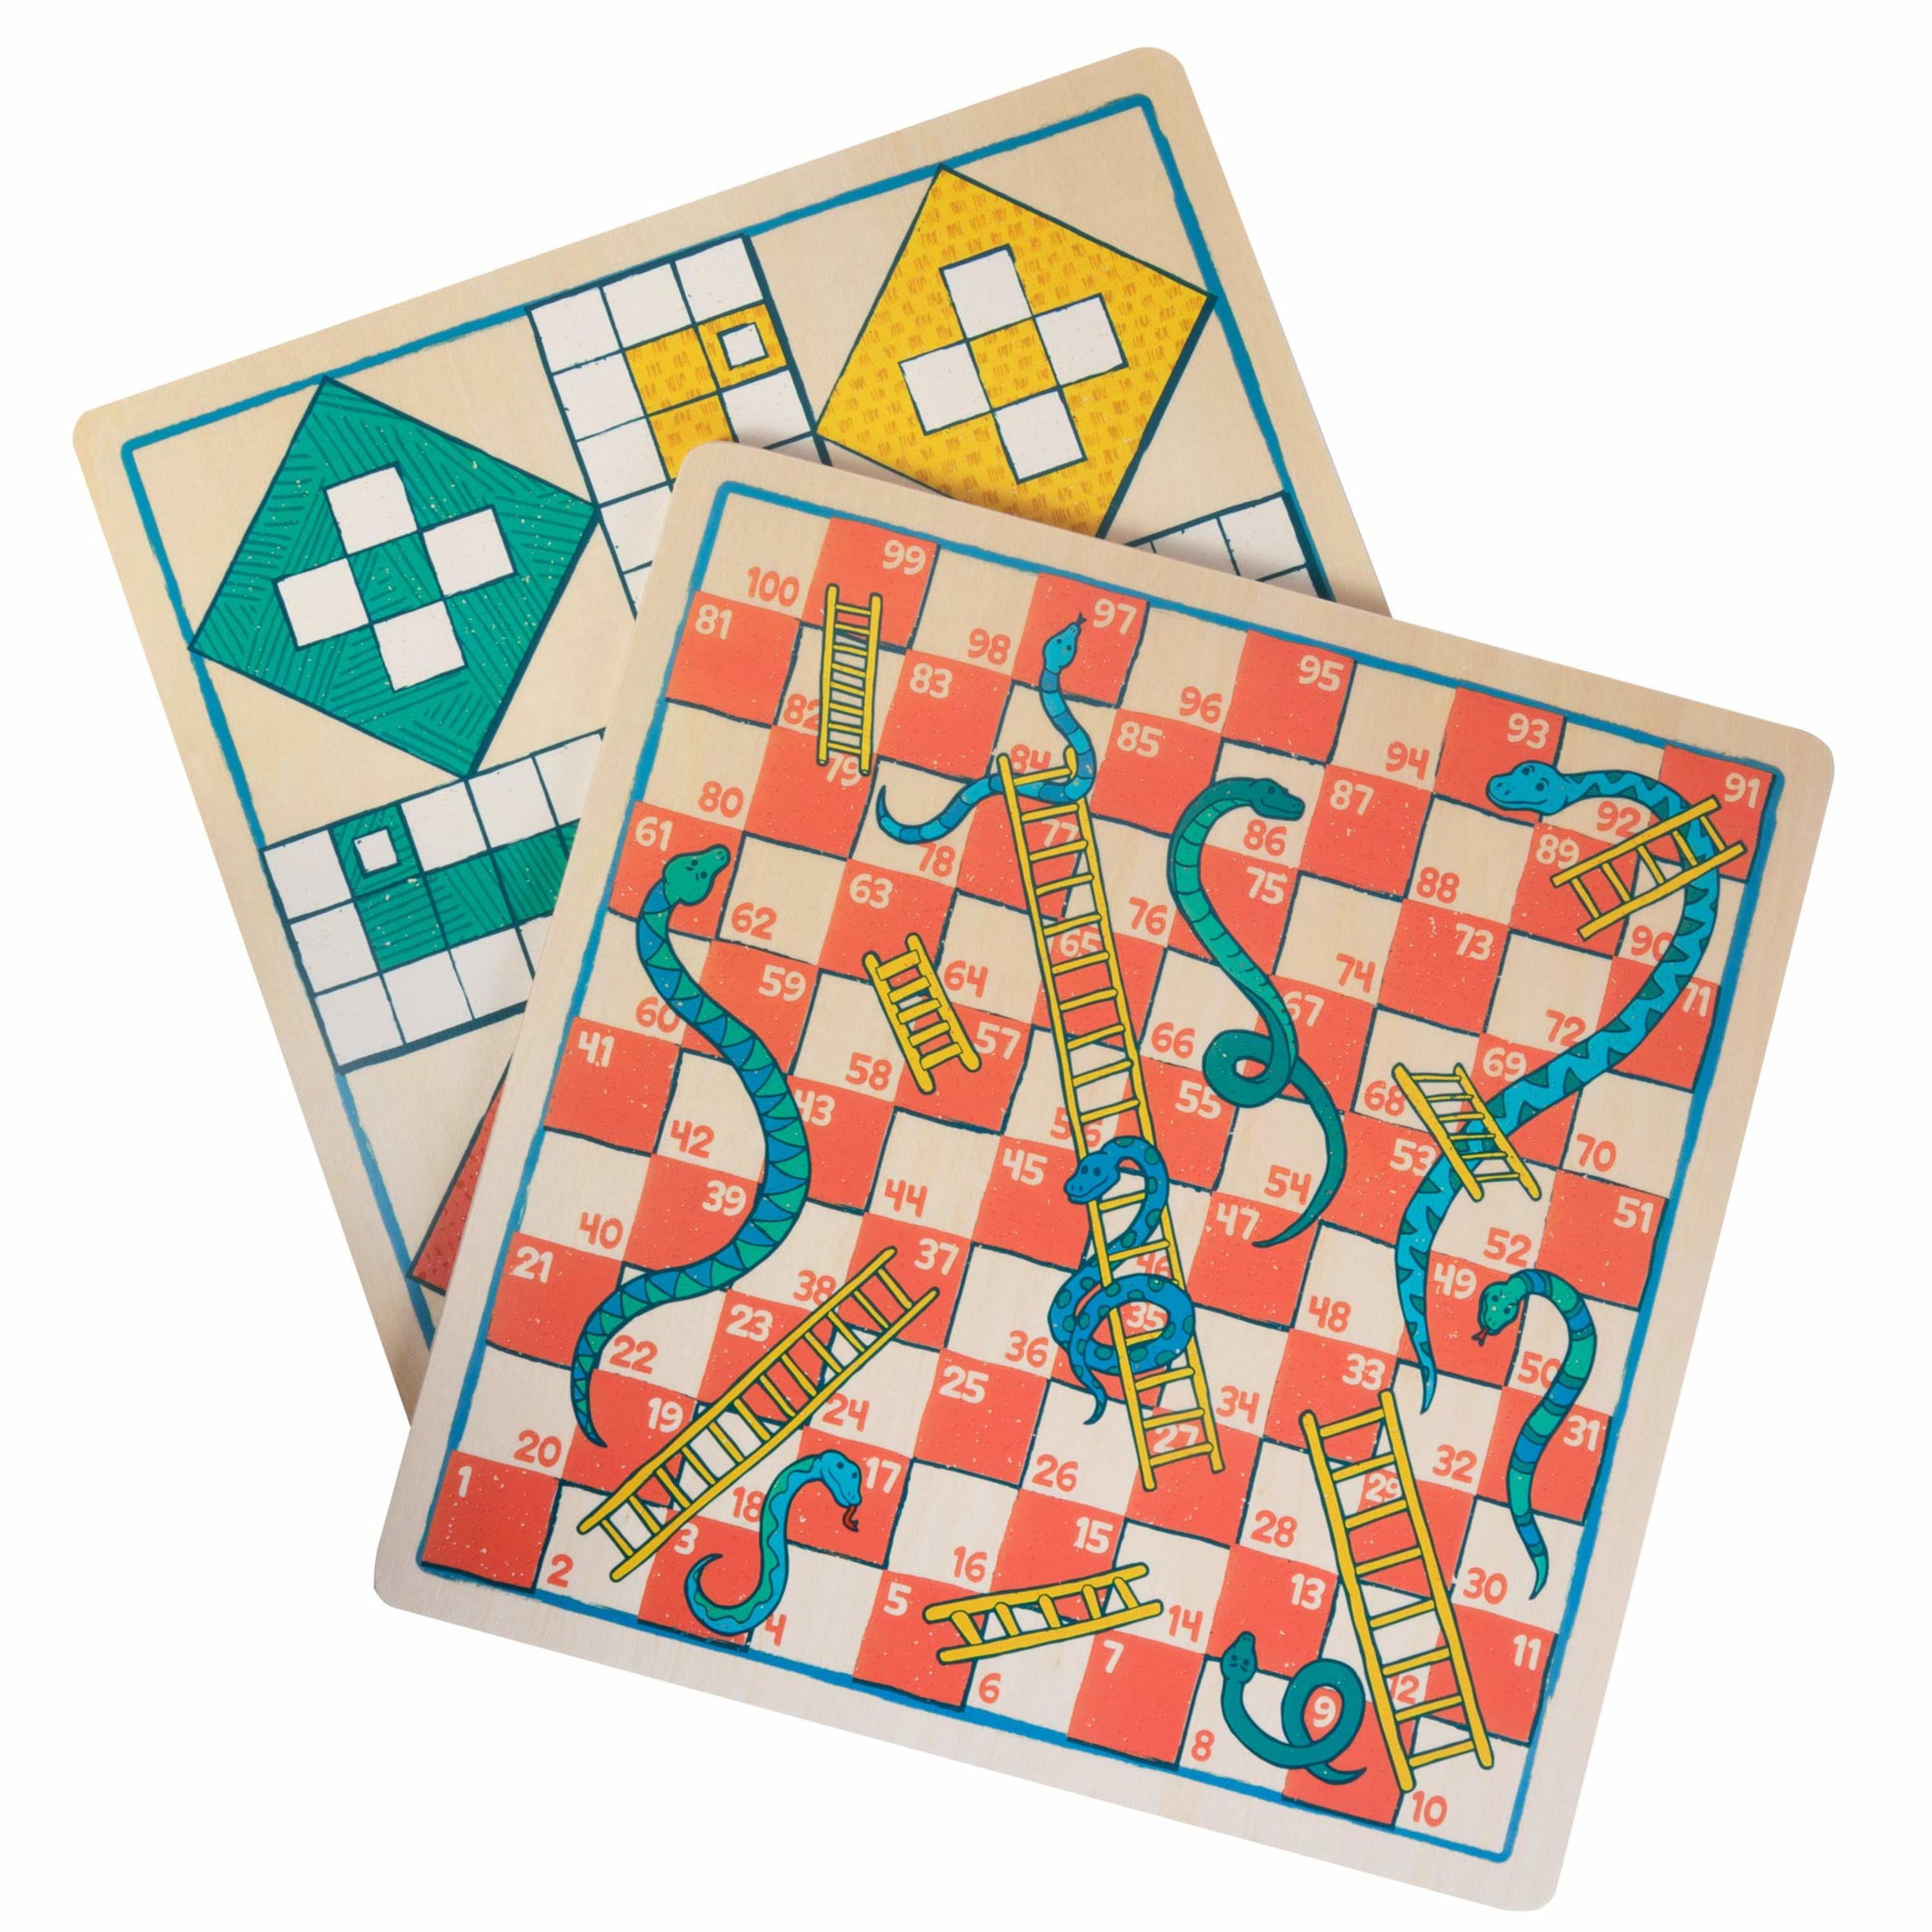 About: Ludo Game & Snakes and Ladders (Google Play version